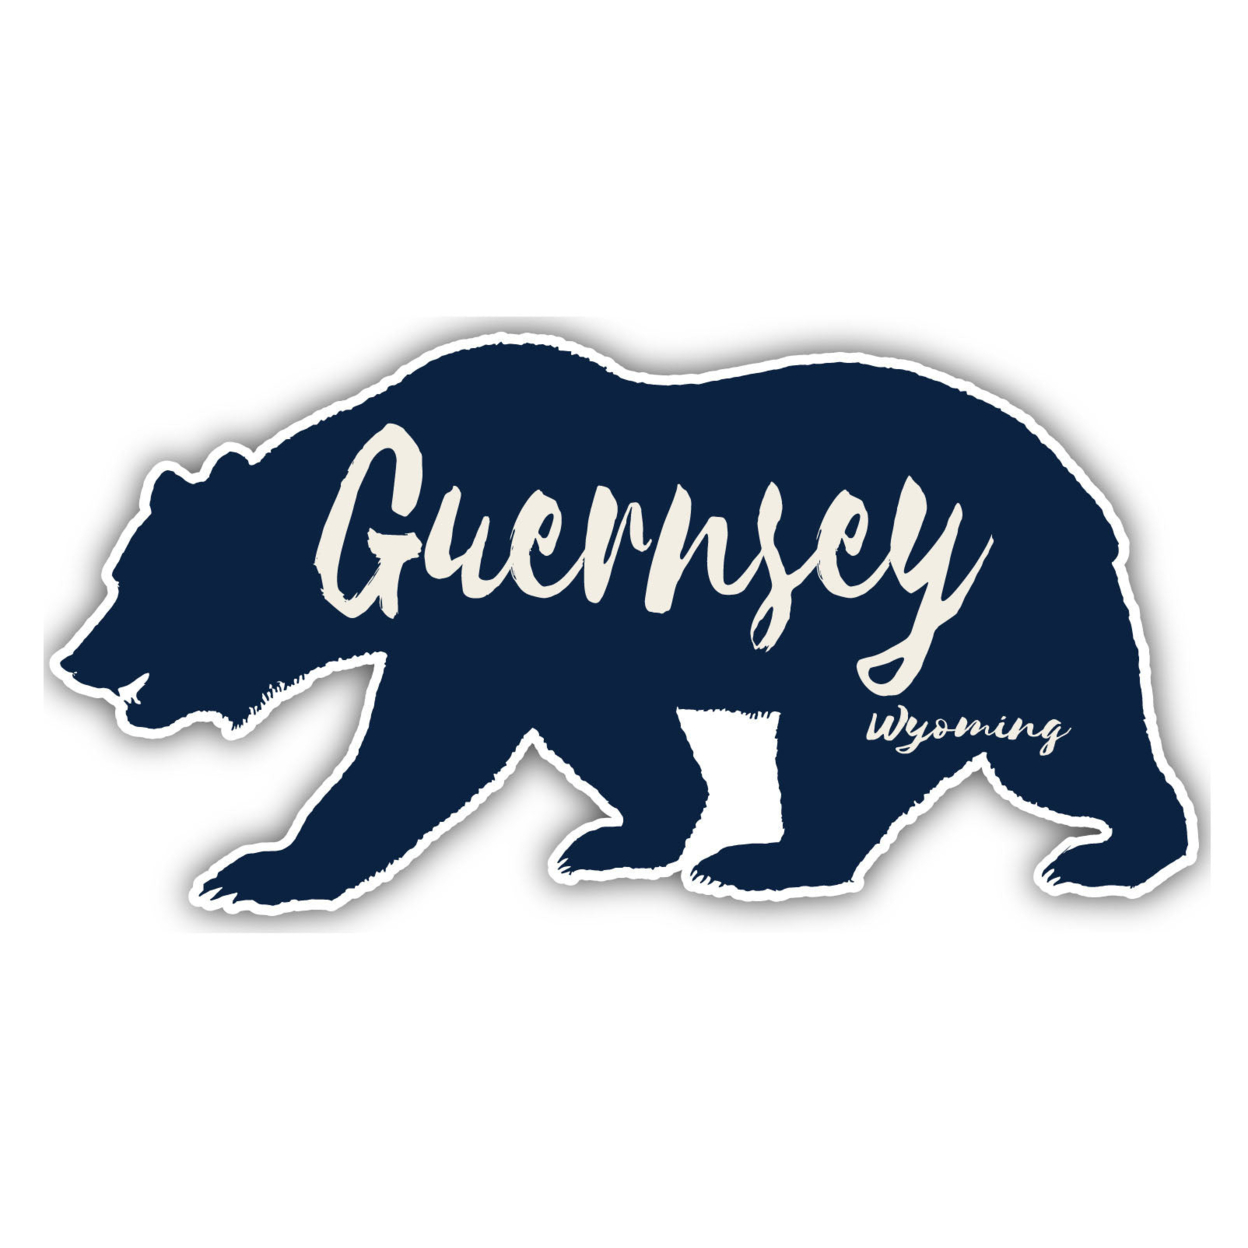 Guernsey Wyoming Souvenir Decorative Stickers (Choose Theme And Size) - 4-Pack, 10-Inch, Bear